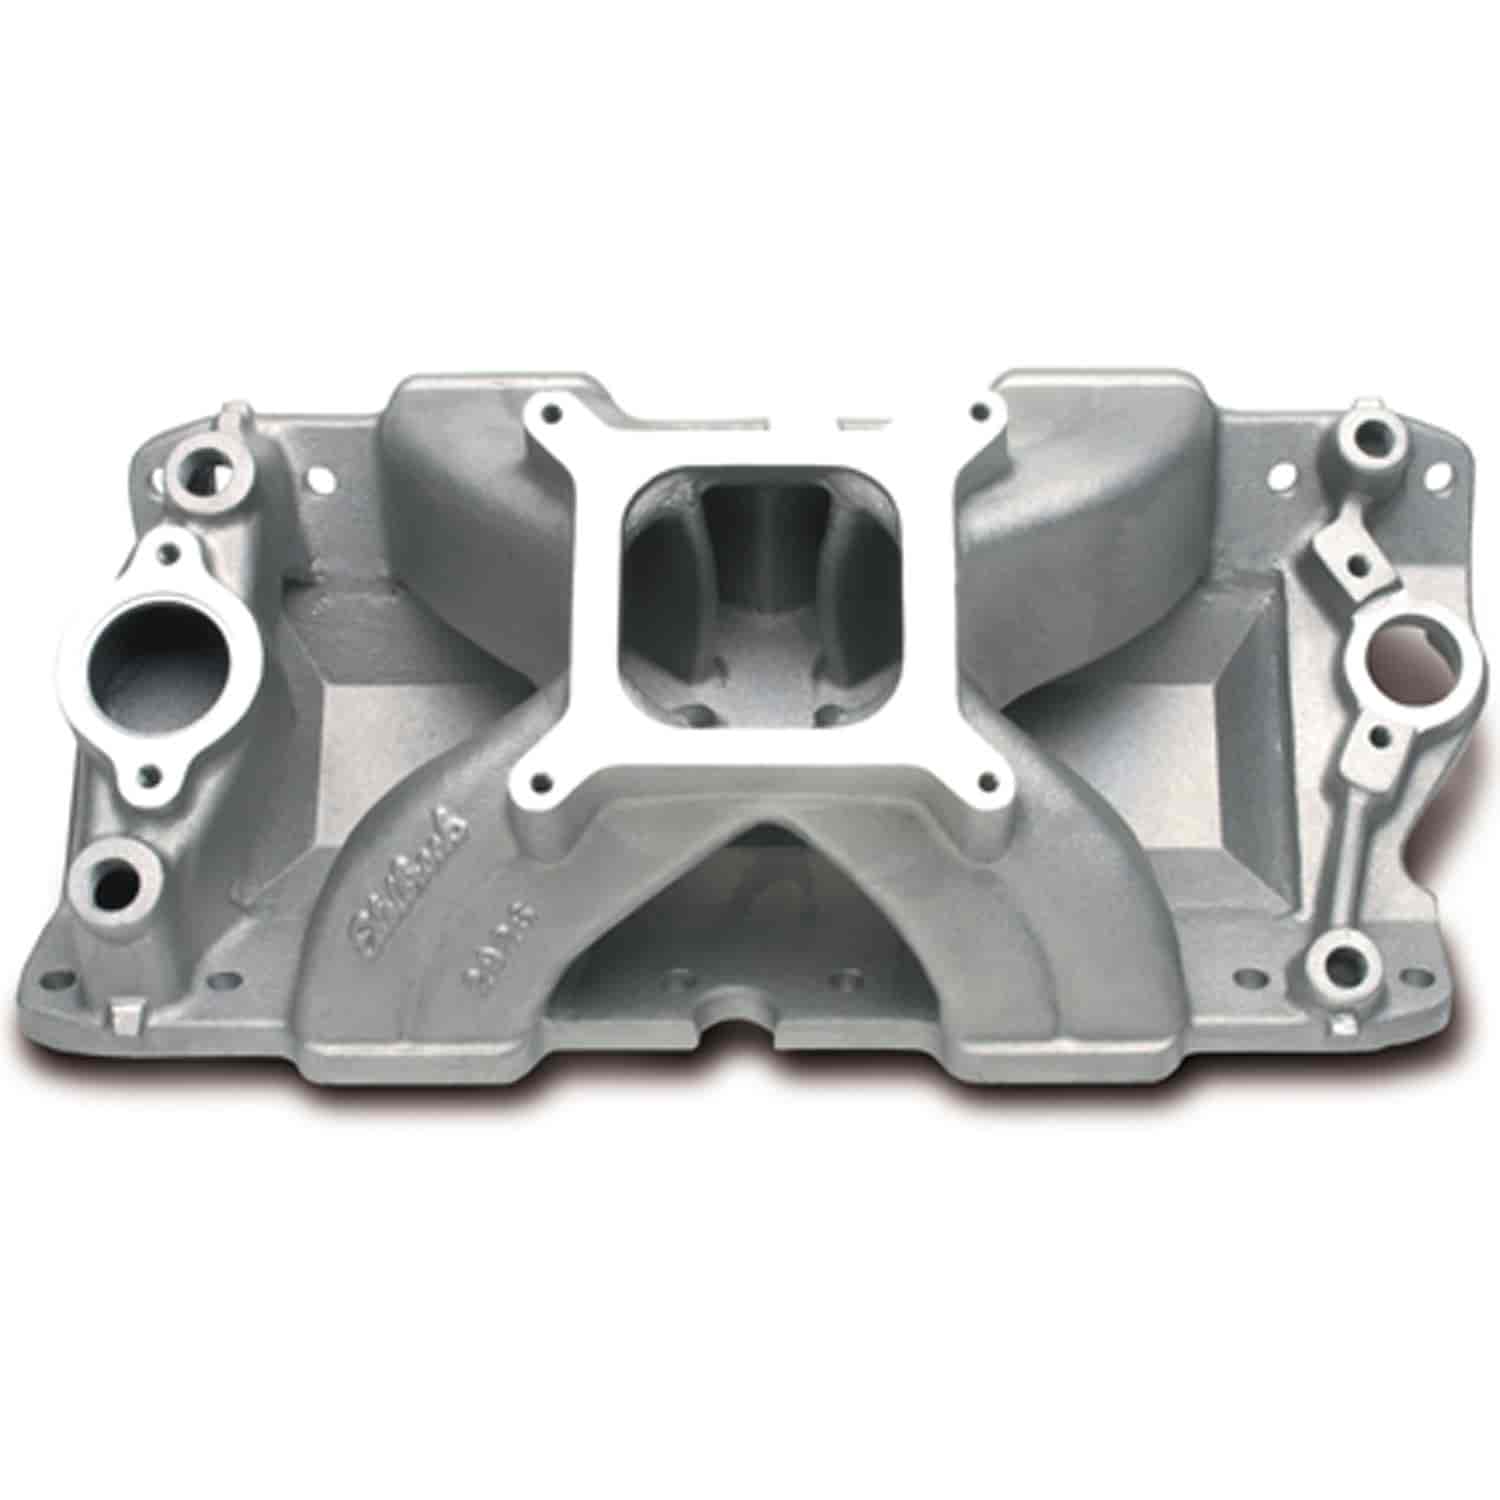 Super Victor Intake Manifold for Small Block Chevy with Raised Intake Port Location 23° Cylinder Heads